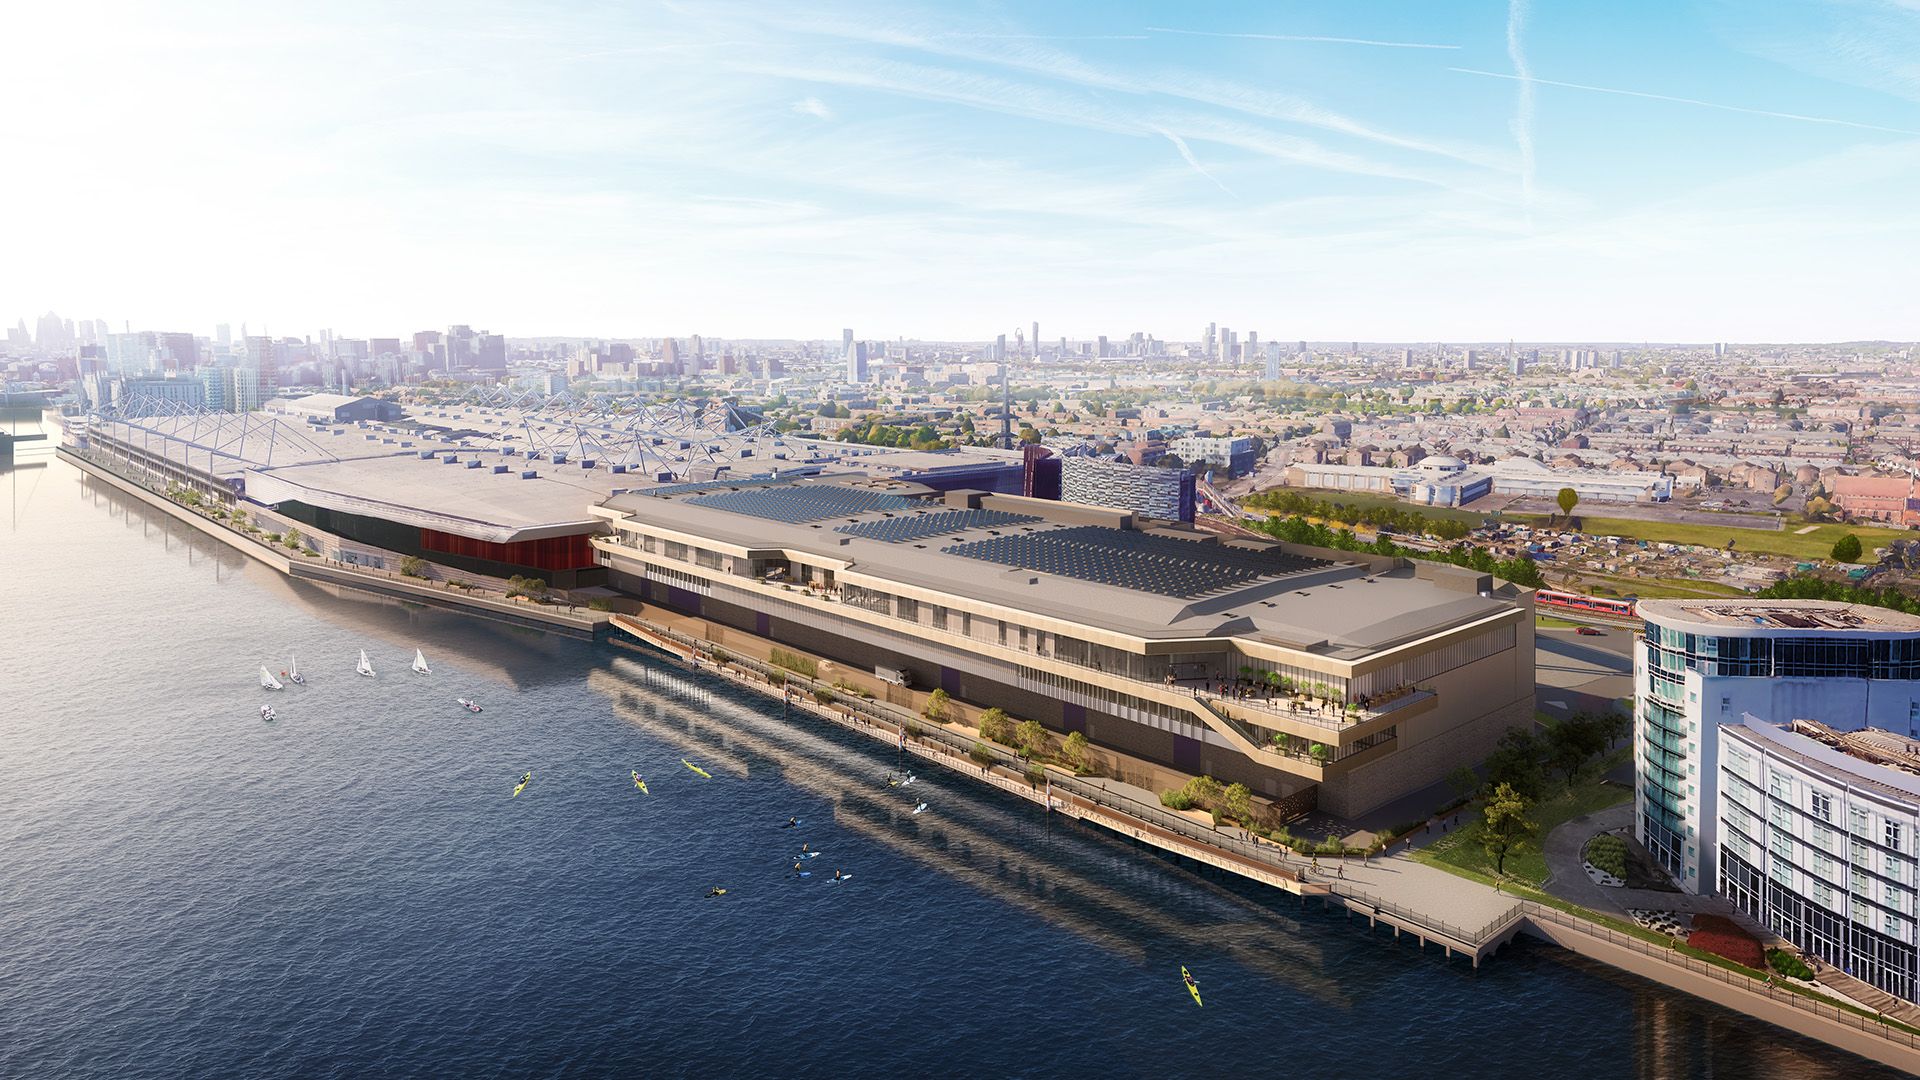 ExCeL London secures approval for expansion to its world class venue